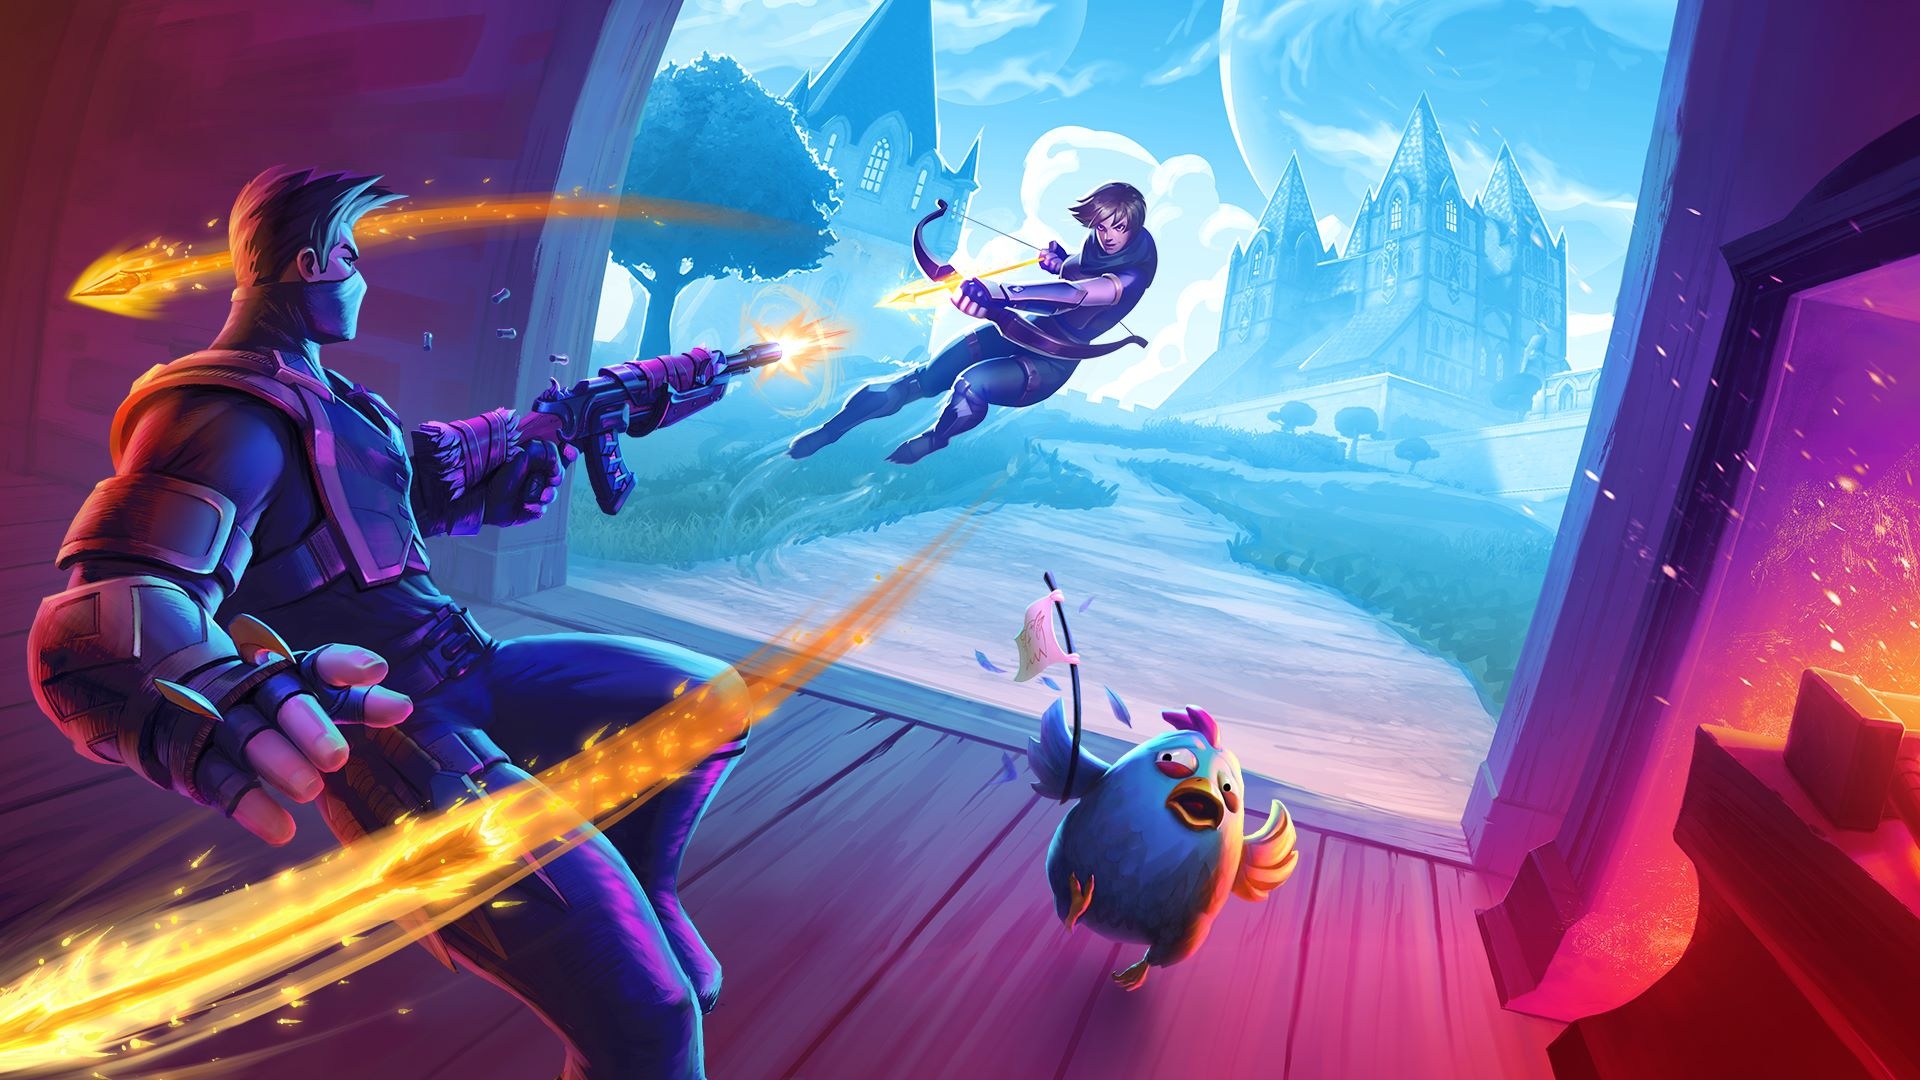 Realm Royale, Game wallpapers, Gaming art, Battle royale excitement, 1920x1080 Full HD Desktop